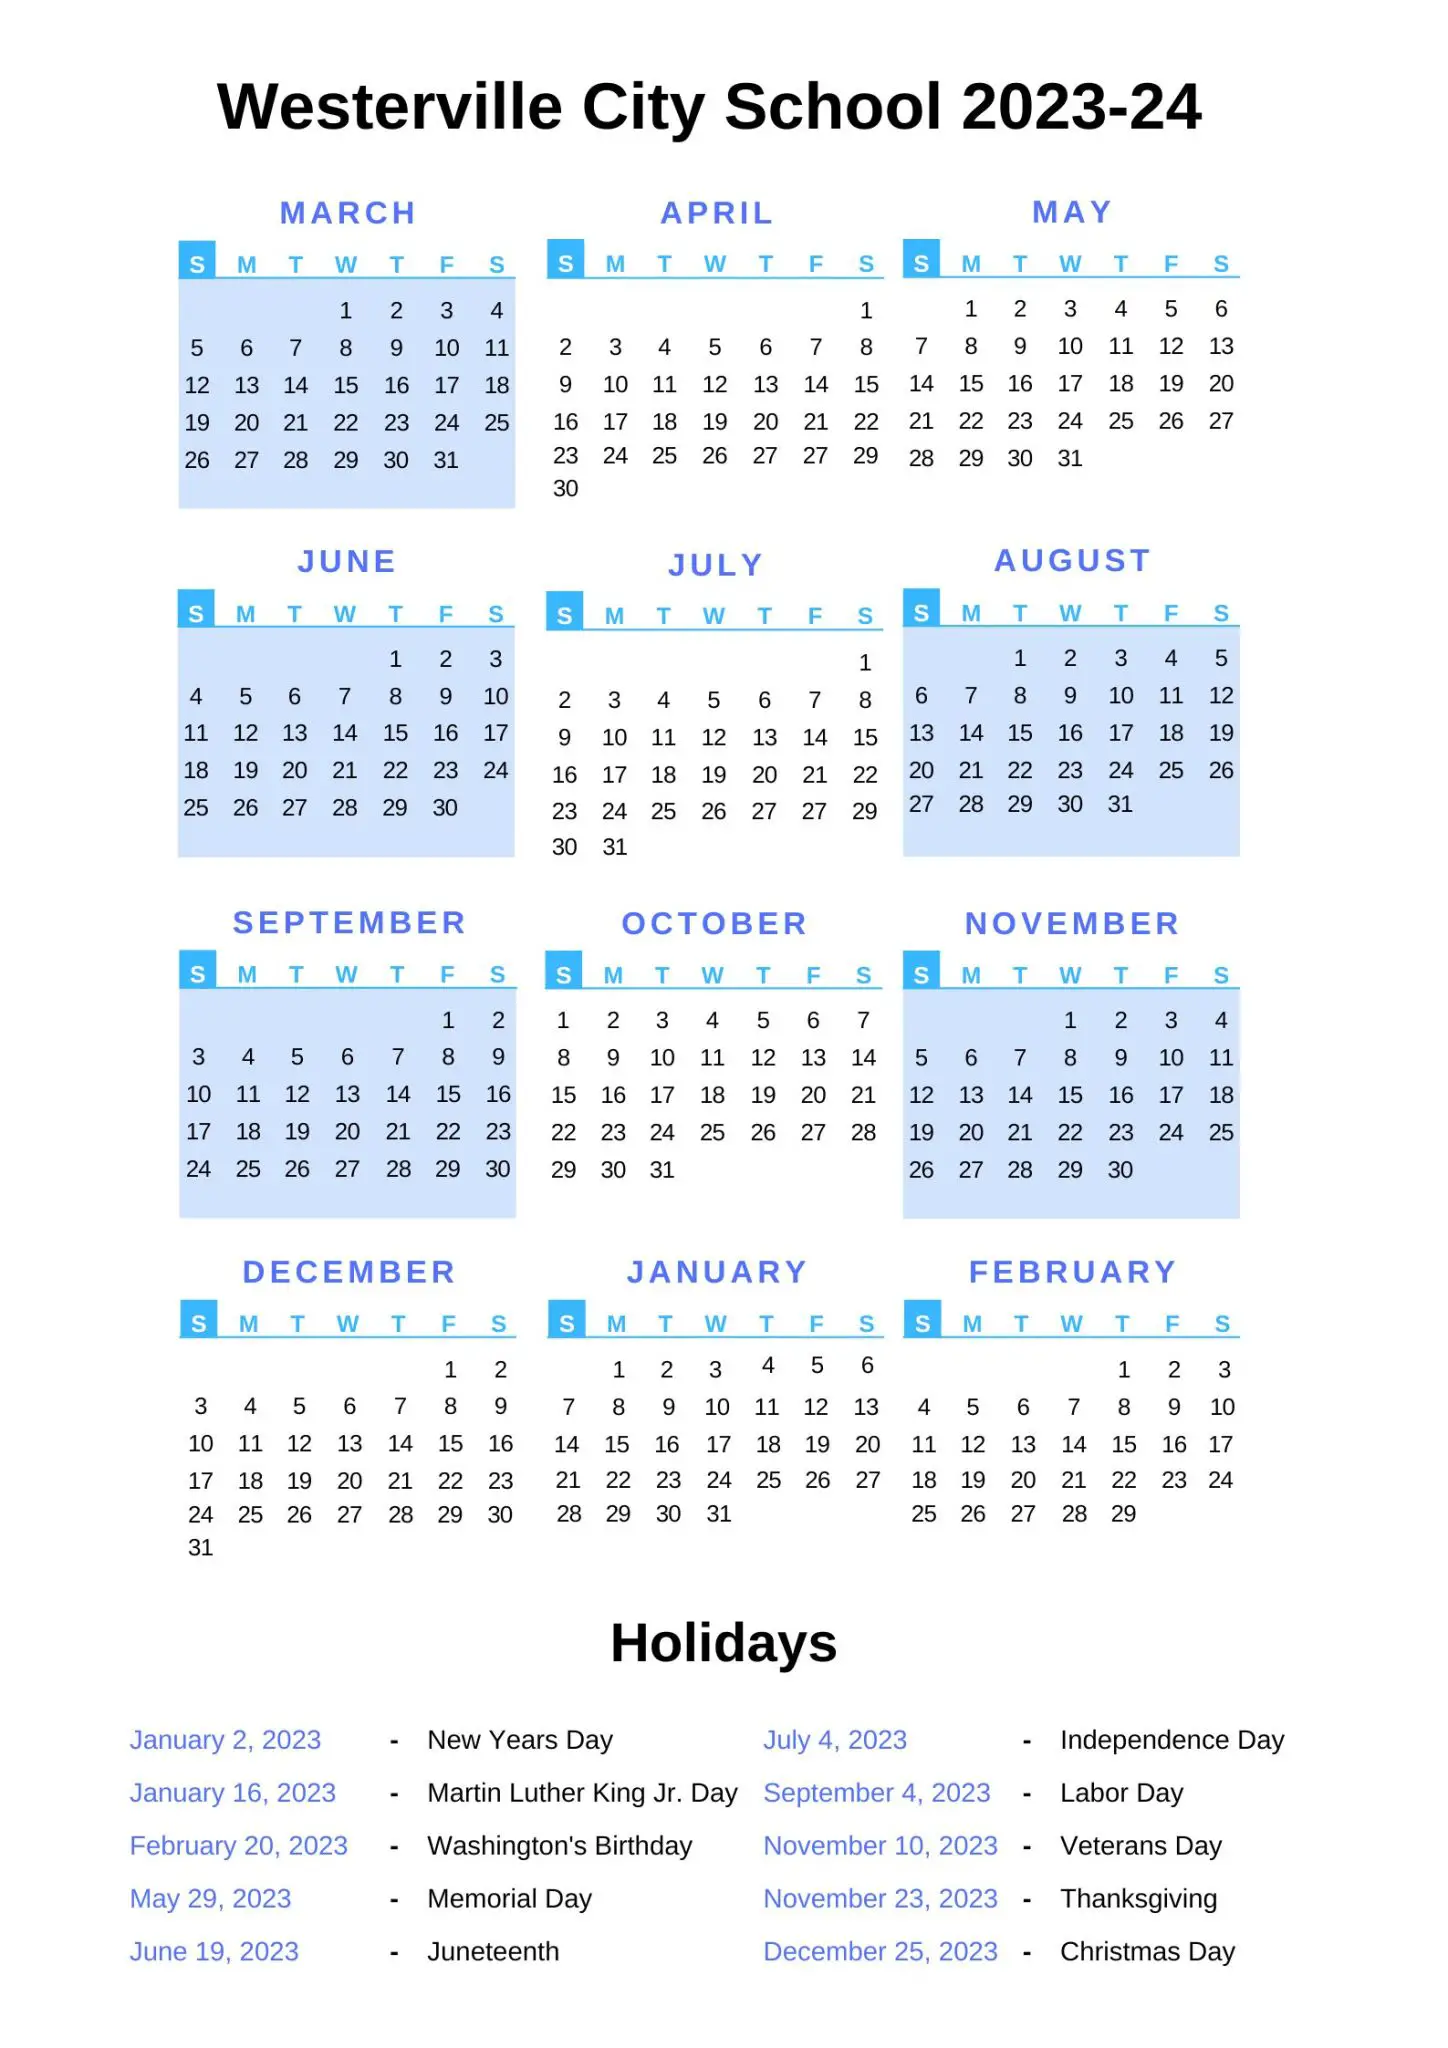 Westerville City Schools Calendar 202324 With Holidays